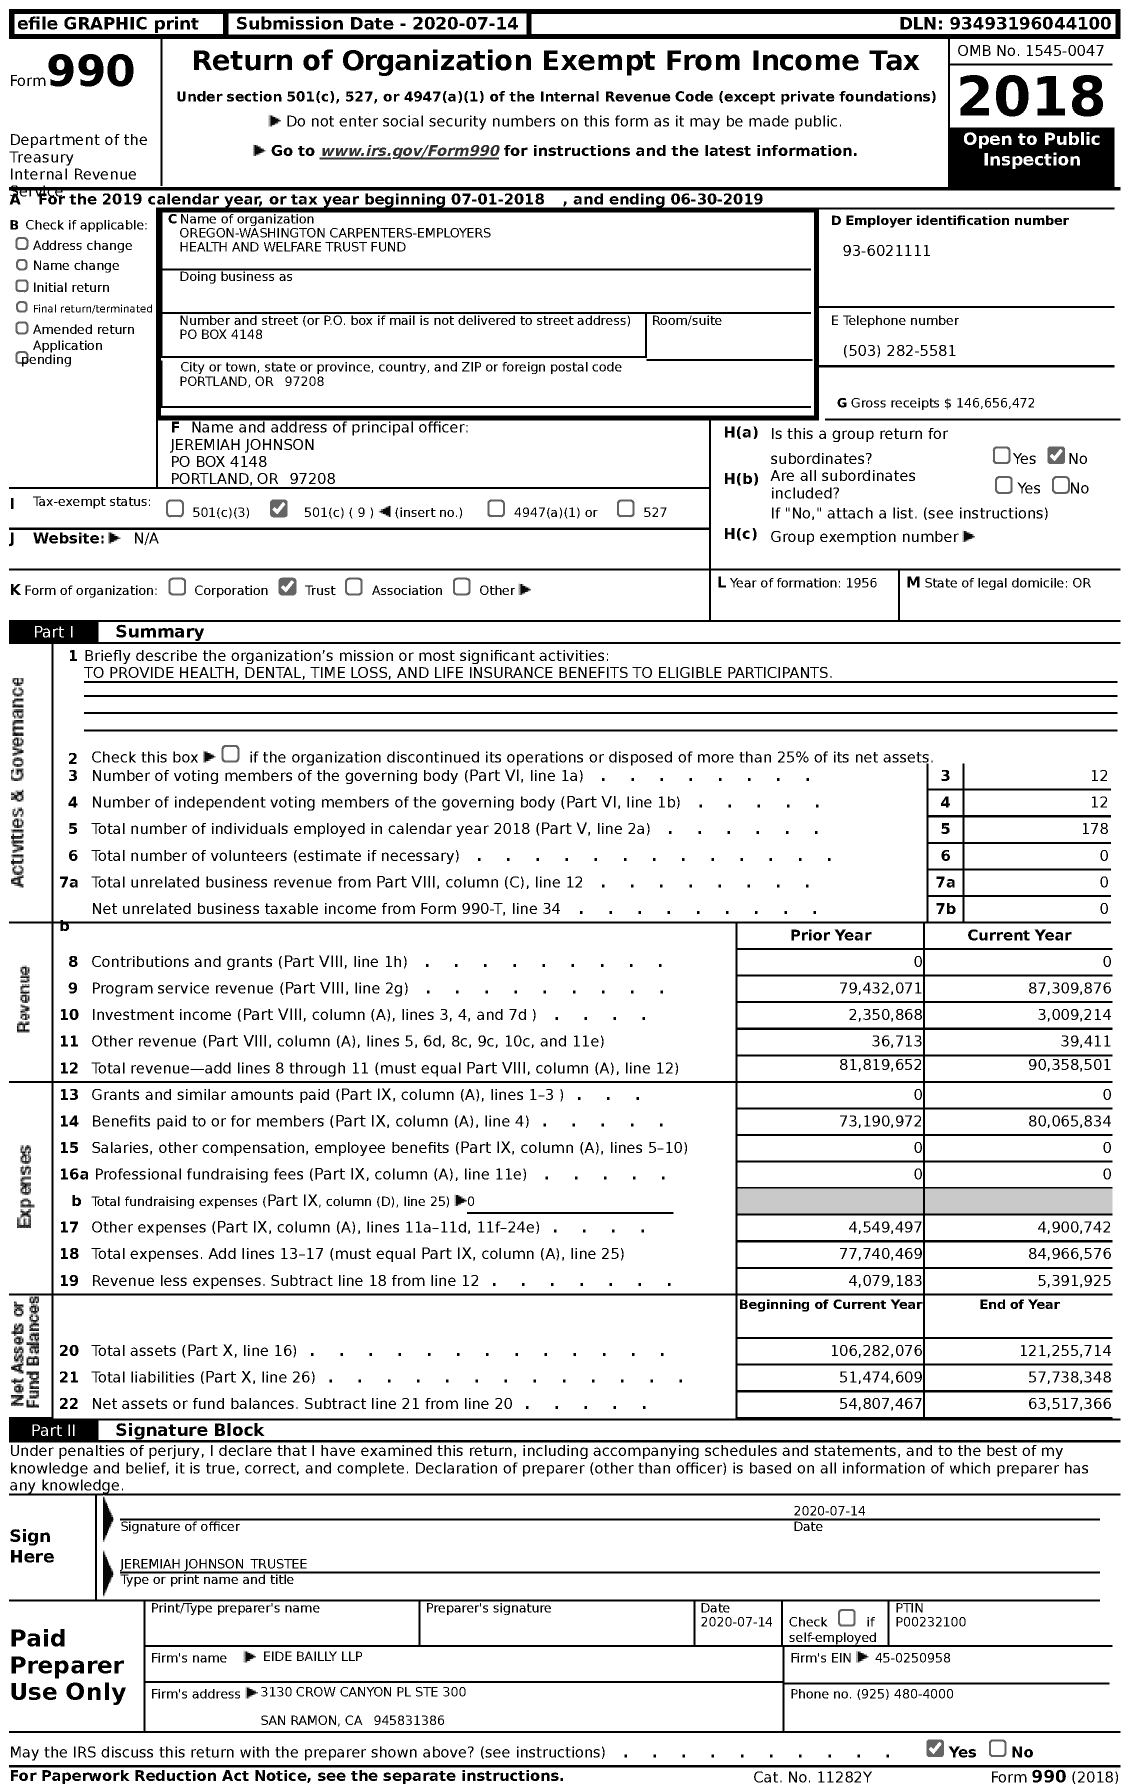 Image of first page of 2018 Form 990 for Oregon-Washington Carpenters-Employers Health and Welfare Trust Fund